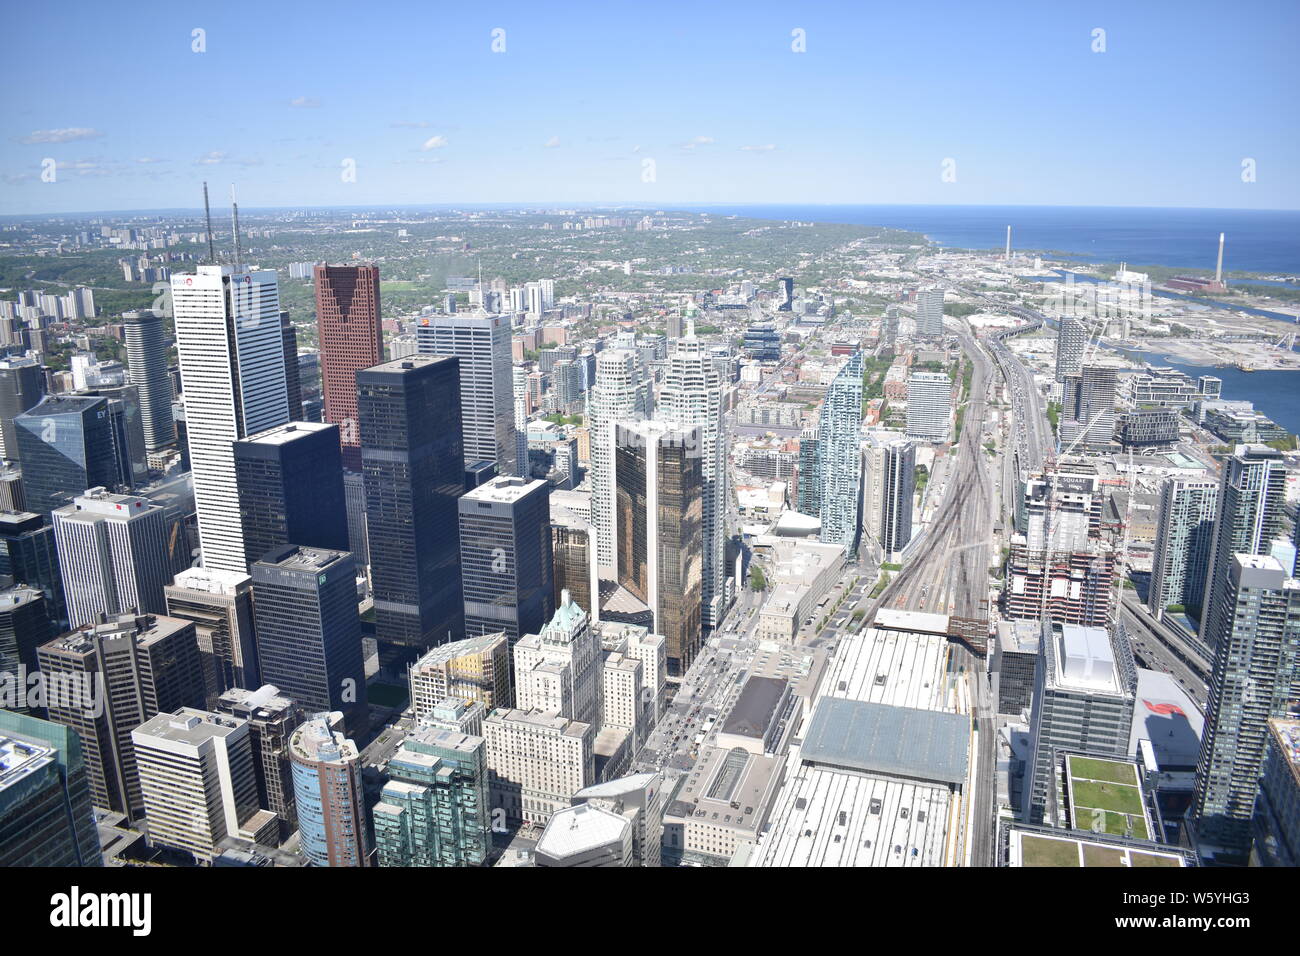 A breathtaking view of Toronto from above, showing the surrounding area under a clear summers day. Stock Photo